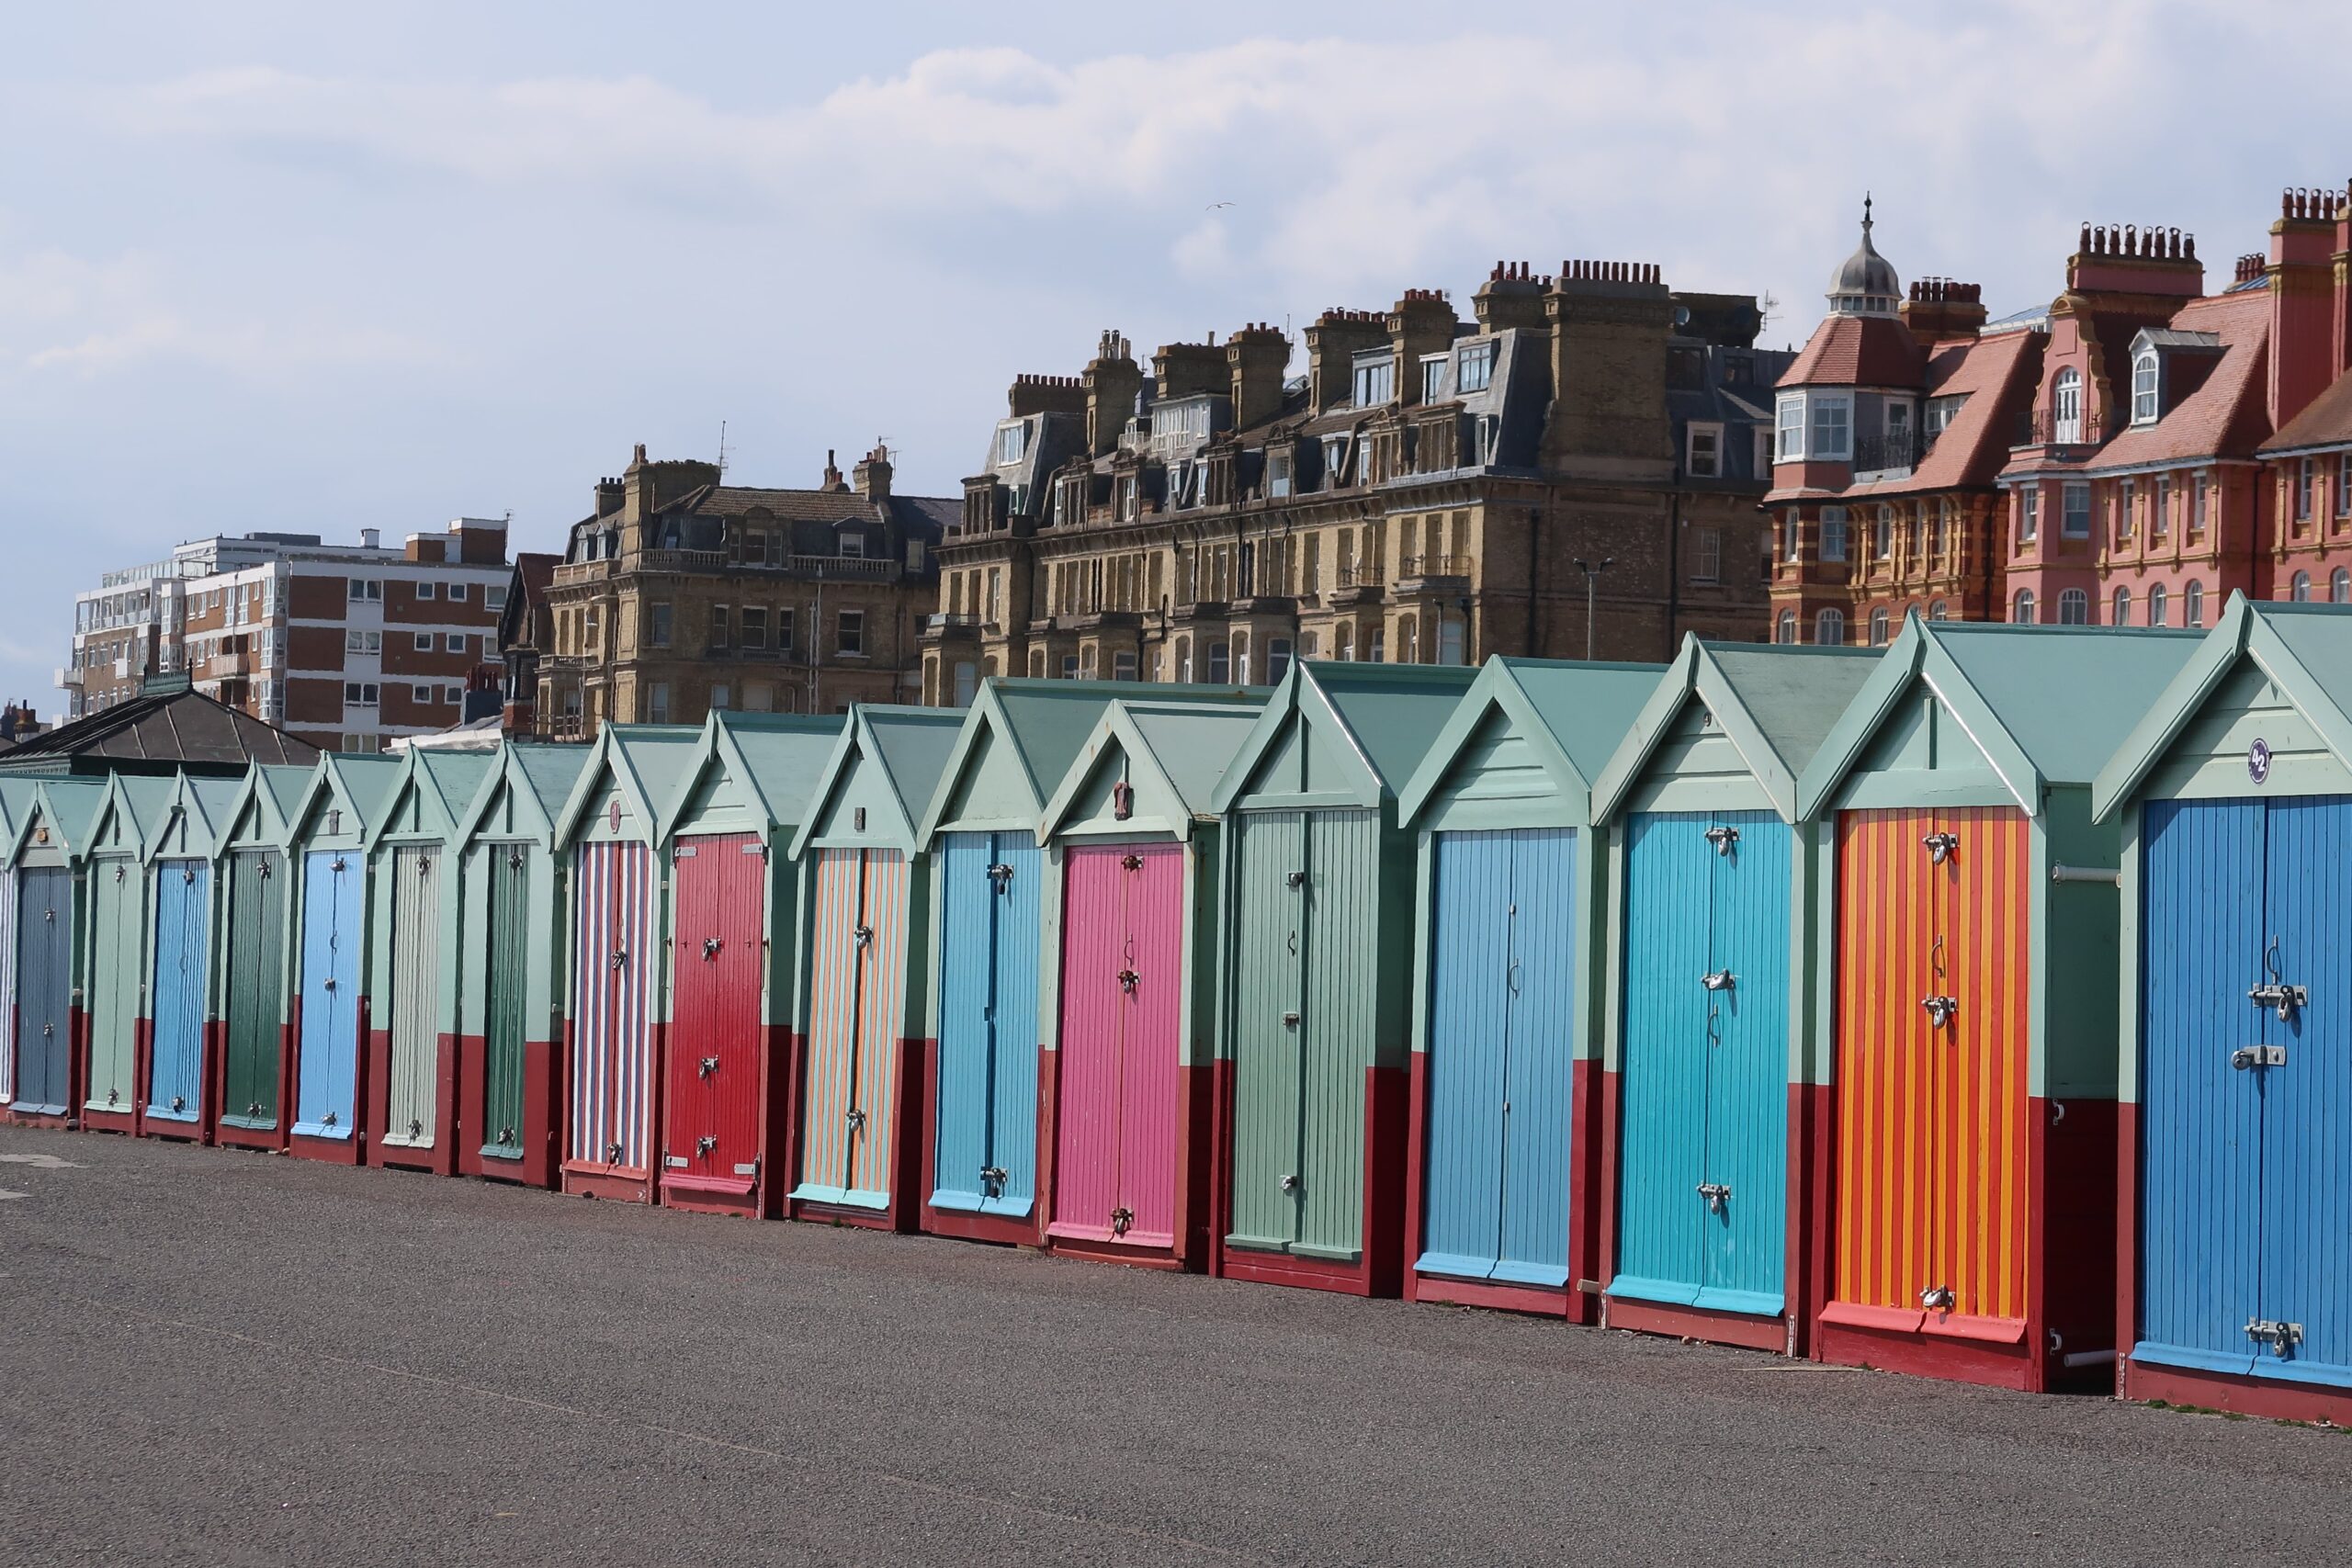 hove beach huts brighton 1 day itinerary things to see and do easy quick day trip from london via train may spring photo spots